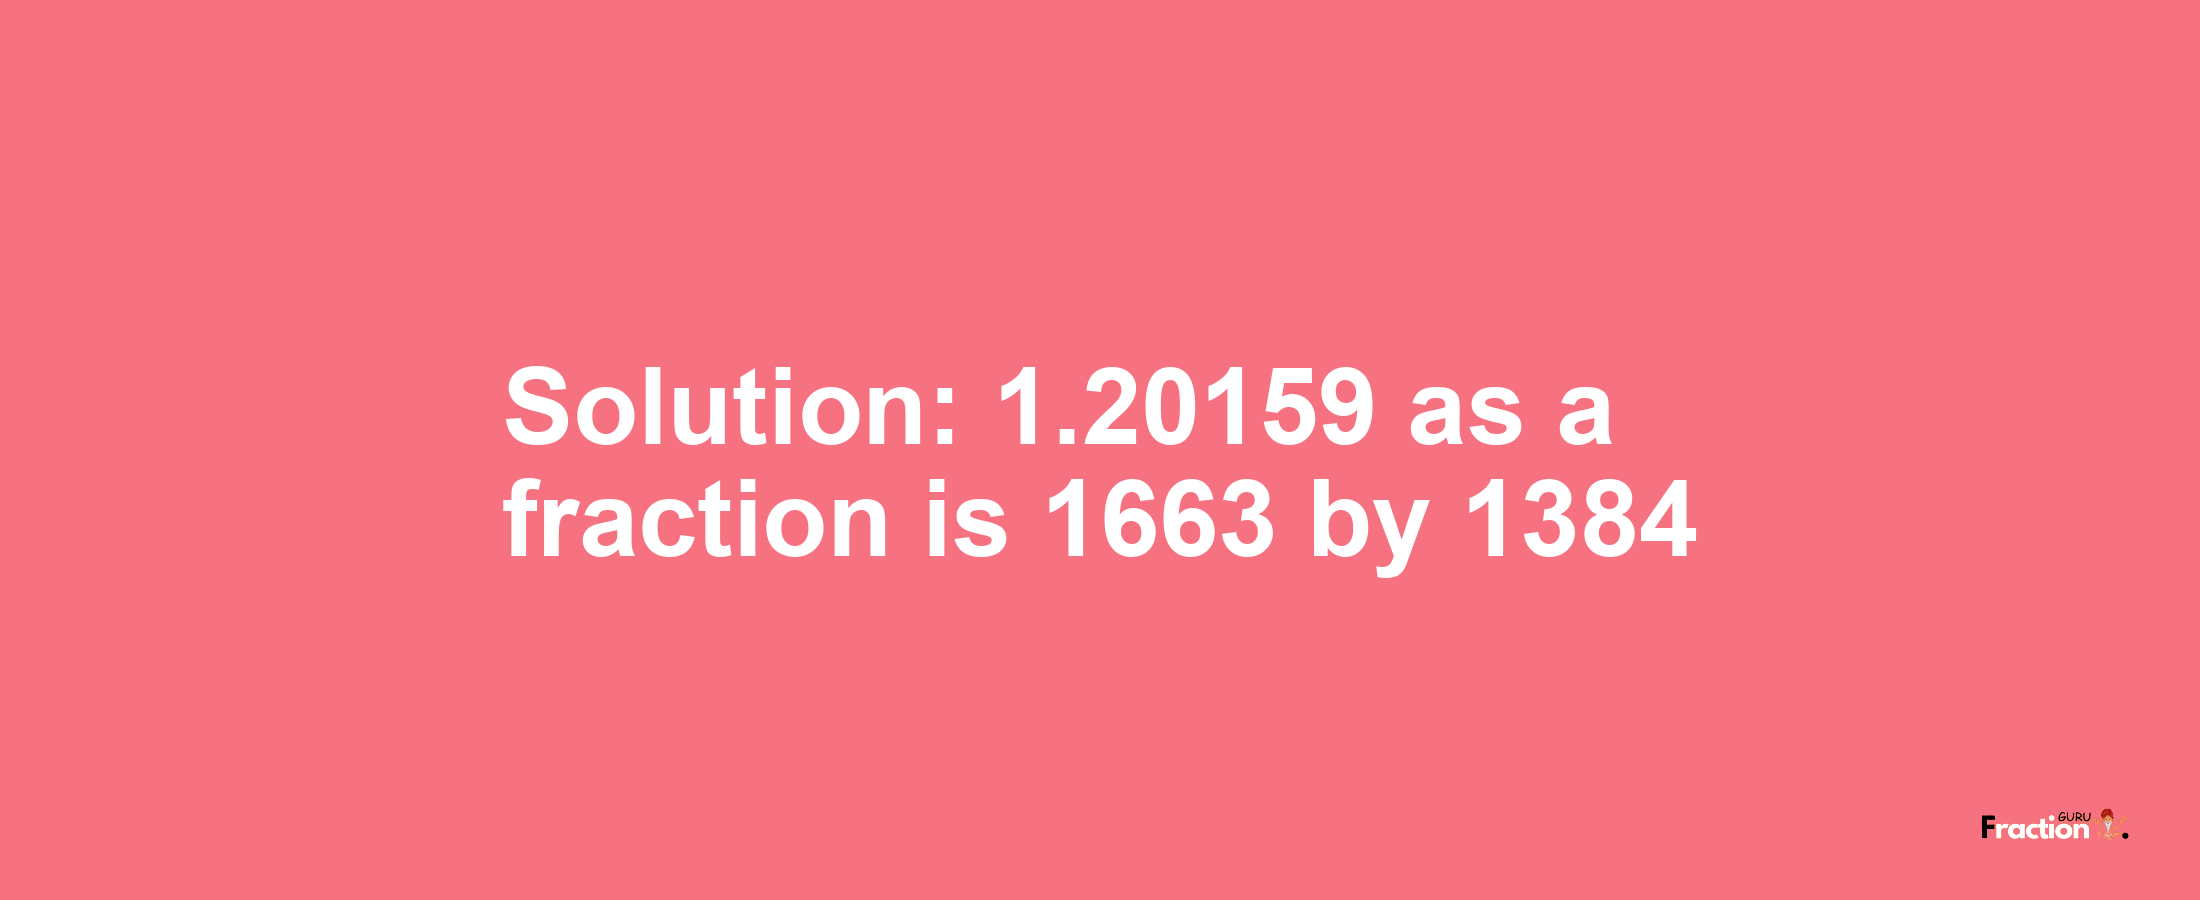 Solution:1.20159 as a fraction is 1663/1384